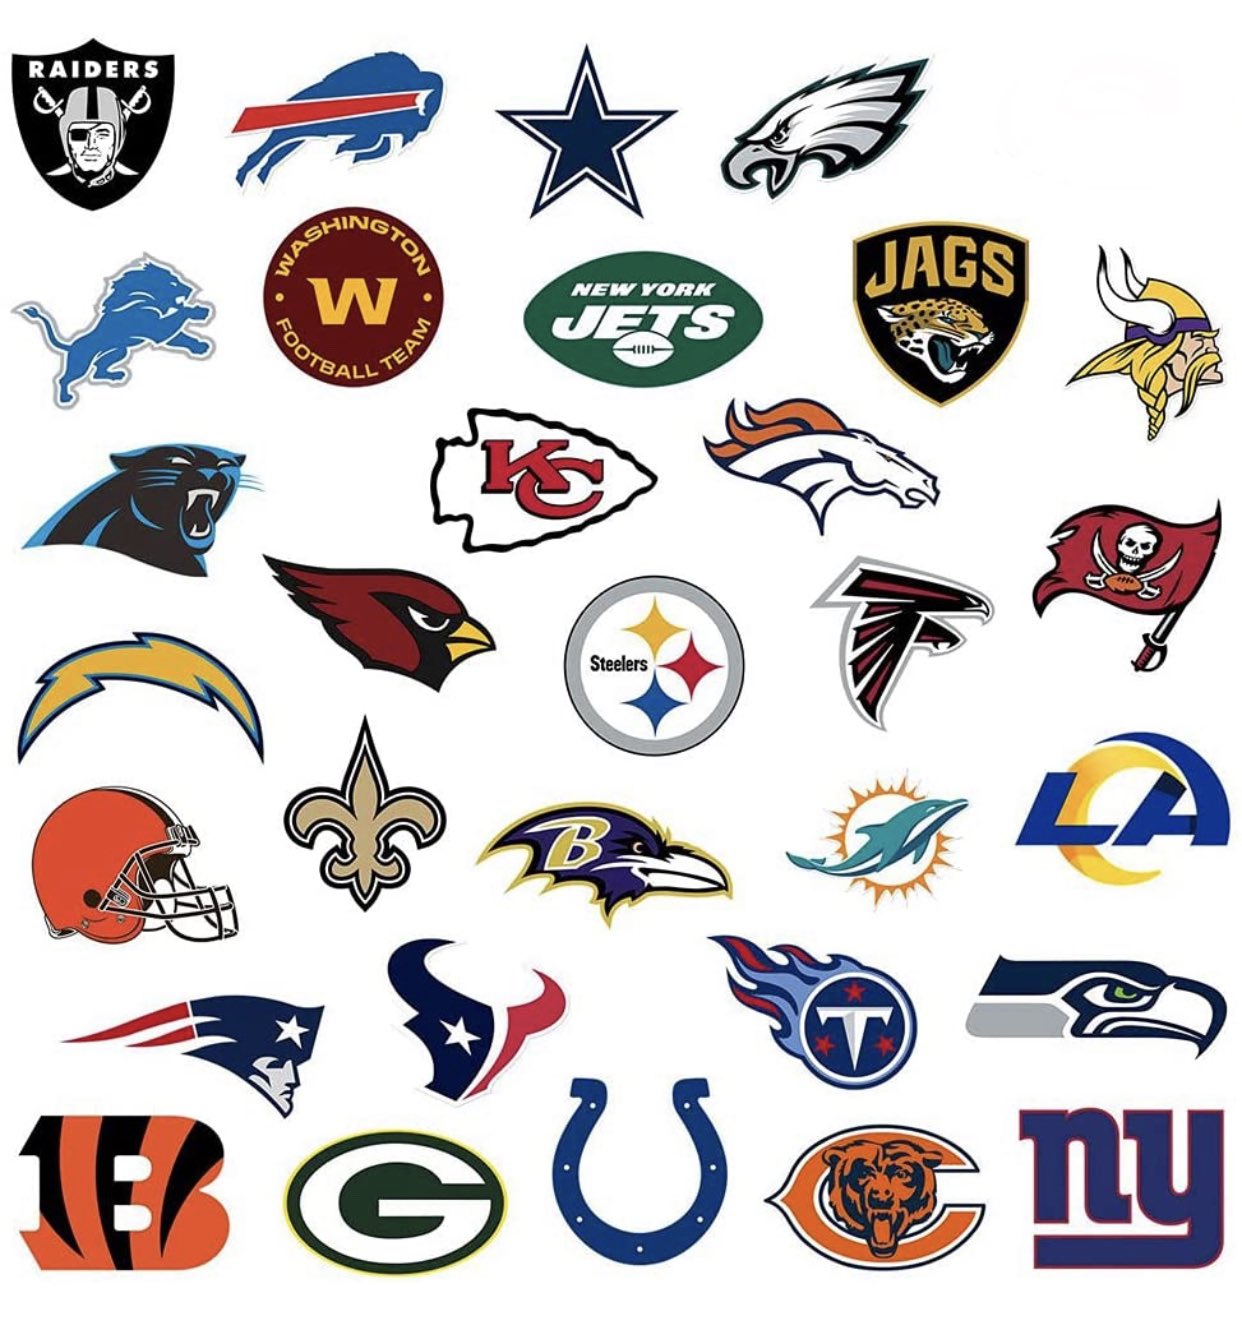 Field Yates on X: 'I put together a graphic of every NFL team that